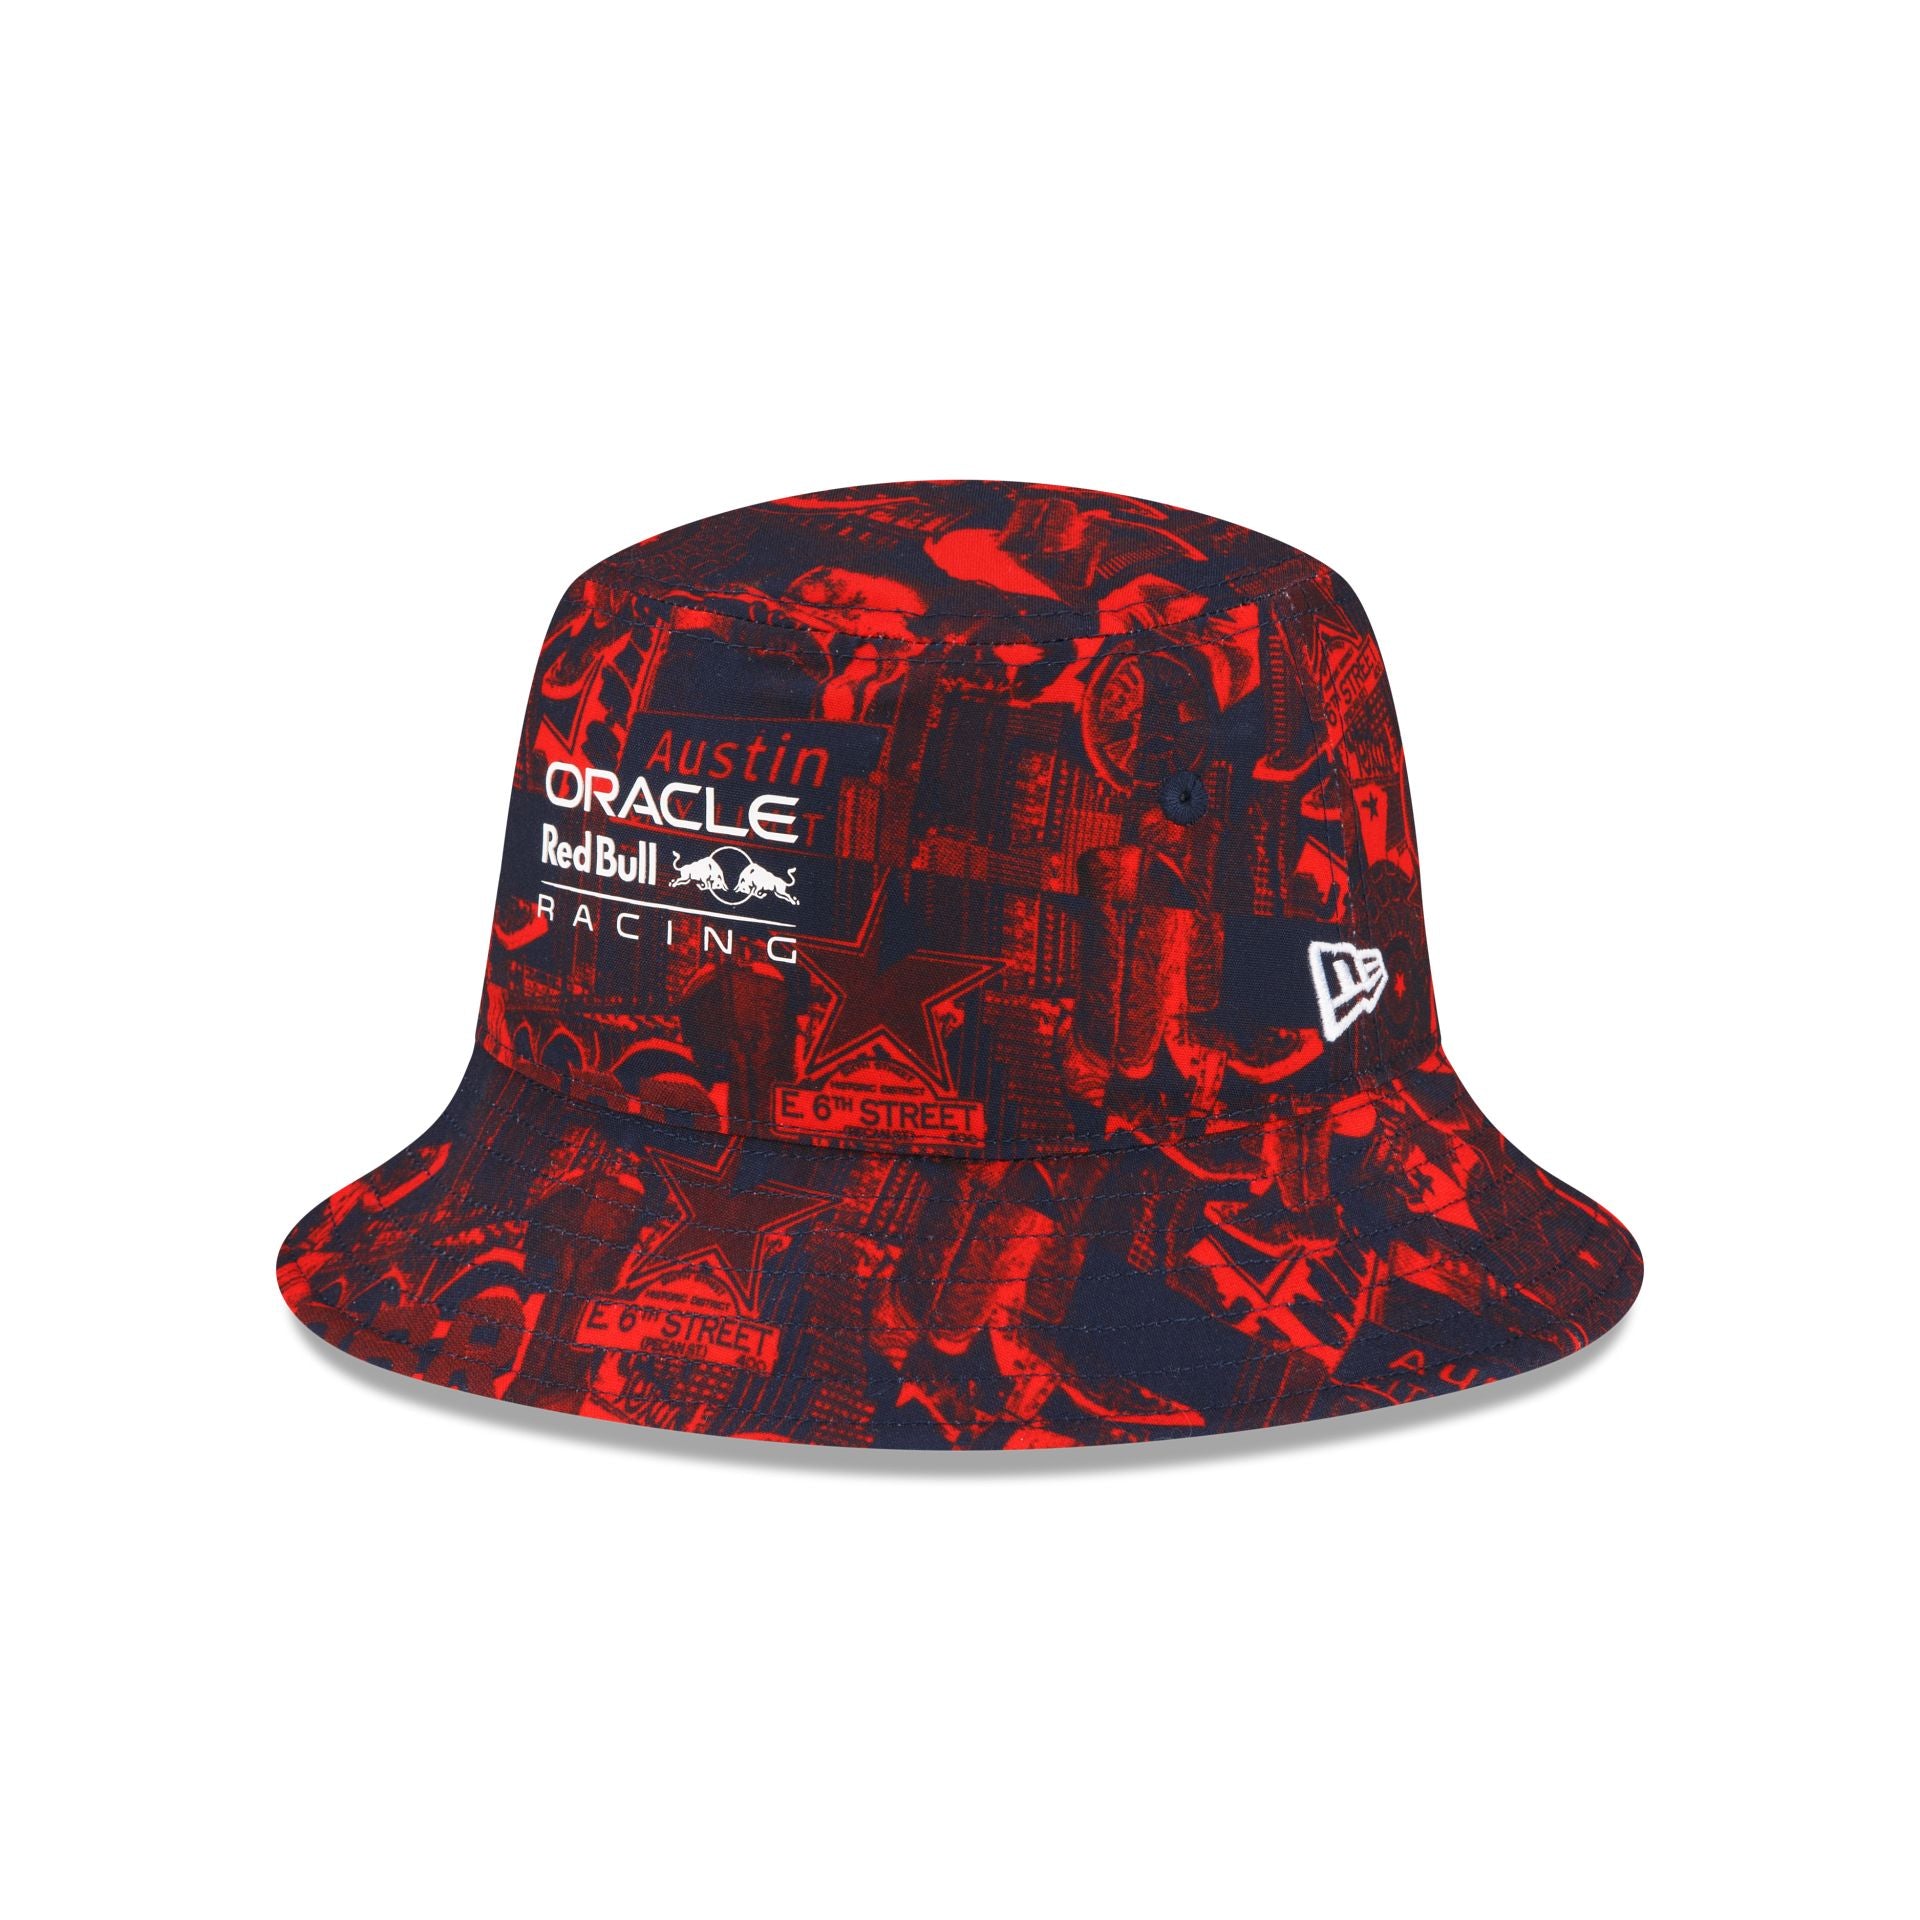 Red Bull Racing F1 Special Edition New Era 9FORTY Austin GP Bucket Hat - S